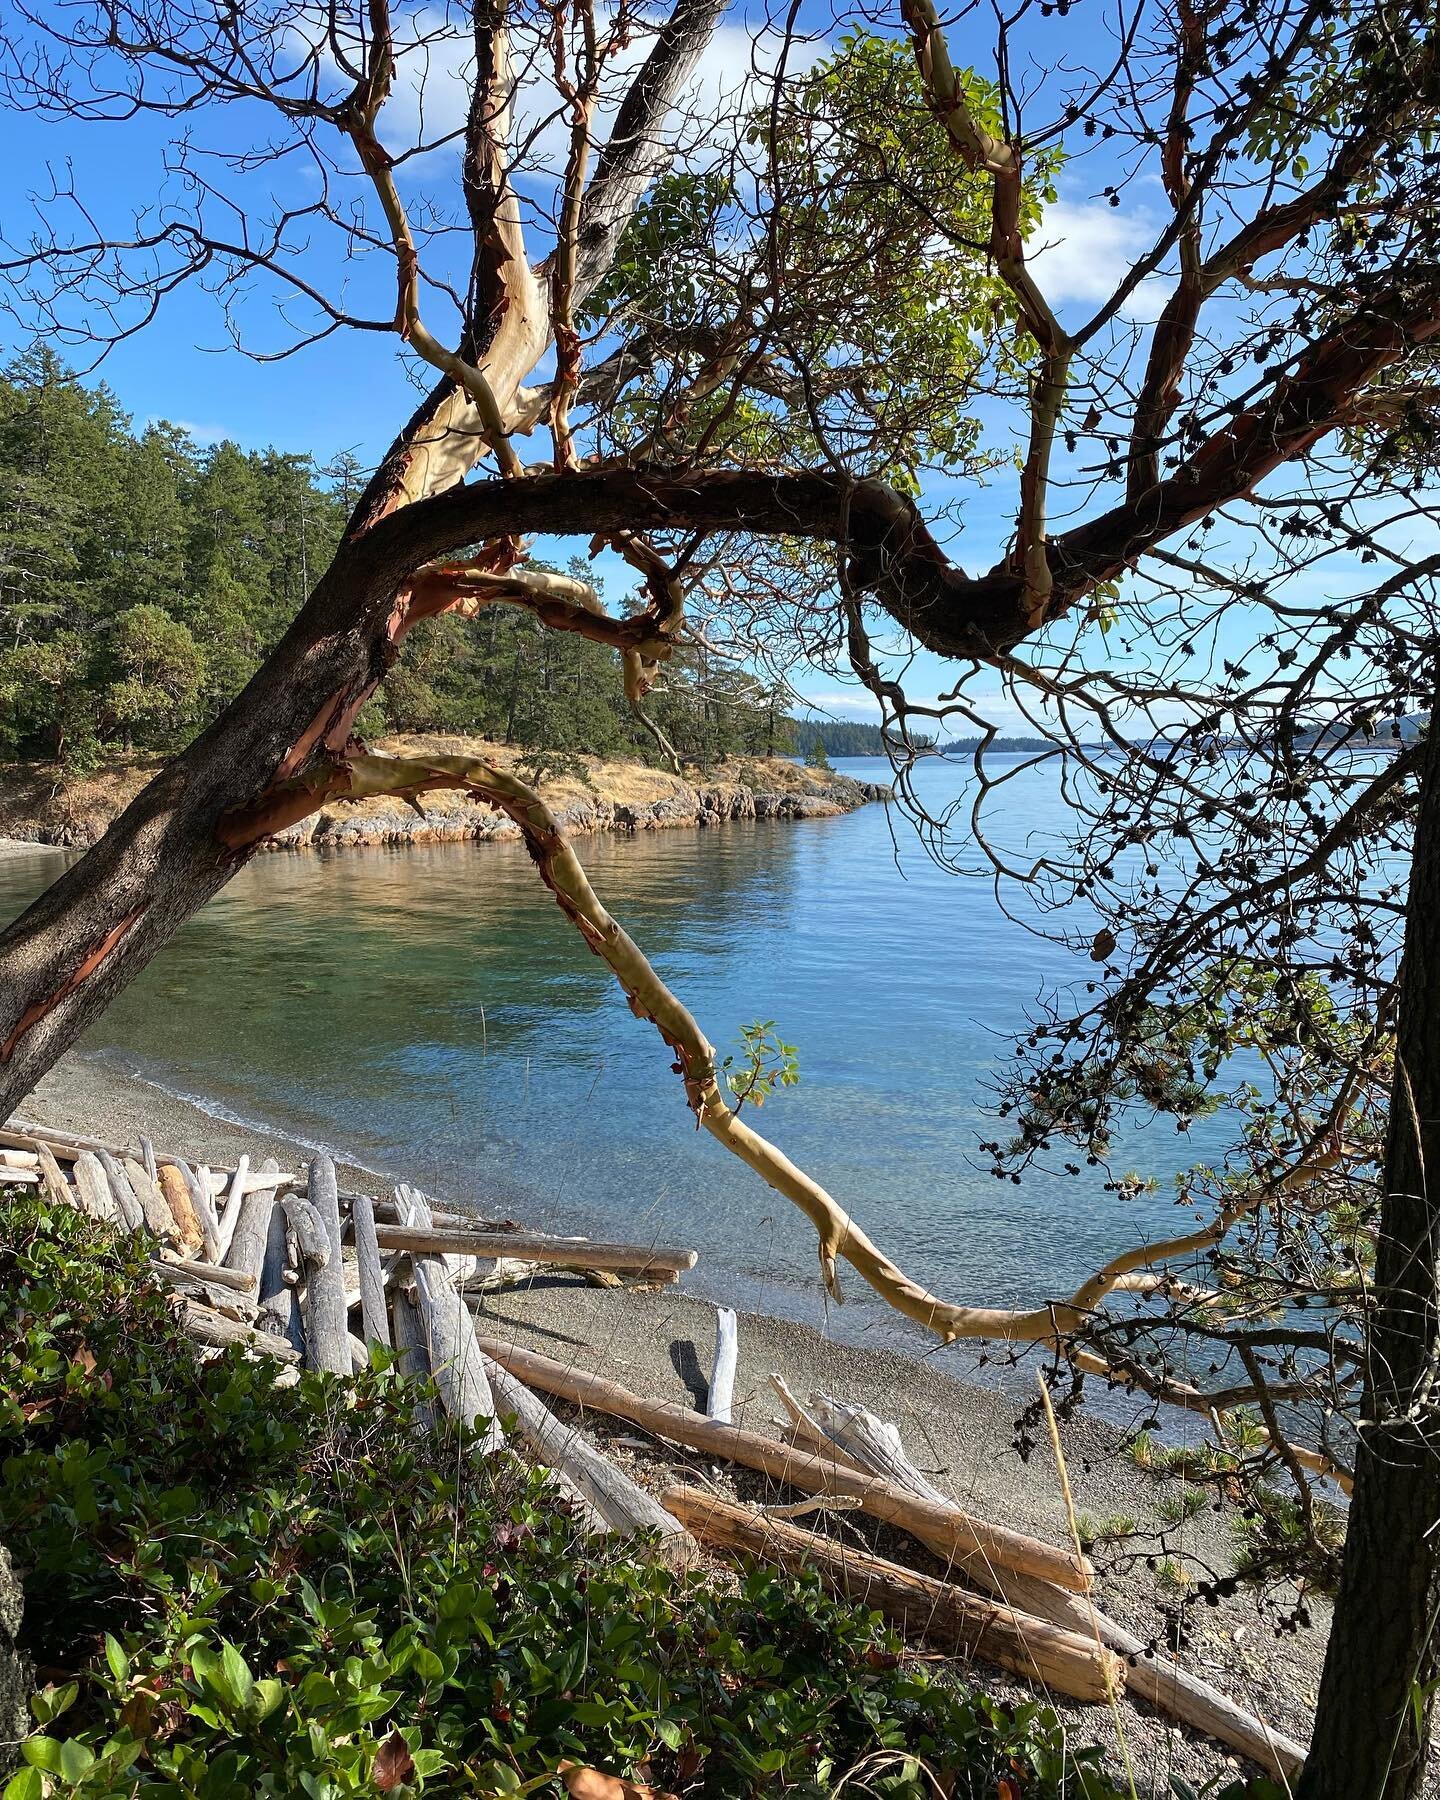 Accessible only by sailboat or motorboat, Jones Island State Park offers two loop trails&mdash;one to the east and one to the west. Simple, right? Just when I was thought I would have to call for help, I found two other people who felt like they&rsqu